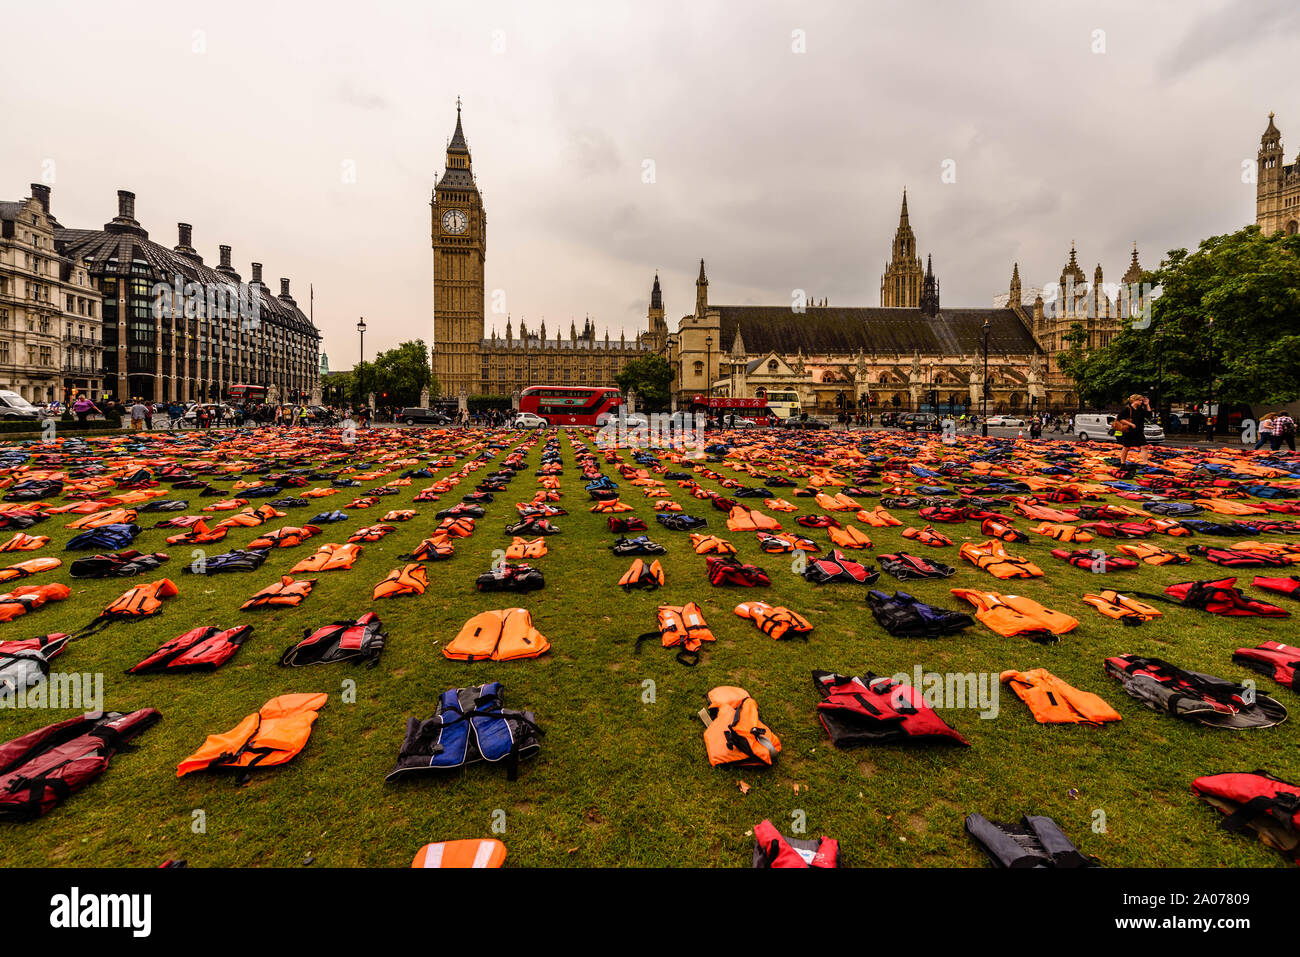 A sea of 2500 lifejackets worn by refugees displayed on Parliament Square in central London, September 19th 2016 Stock Photo